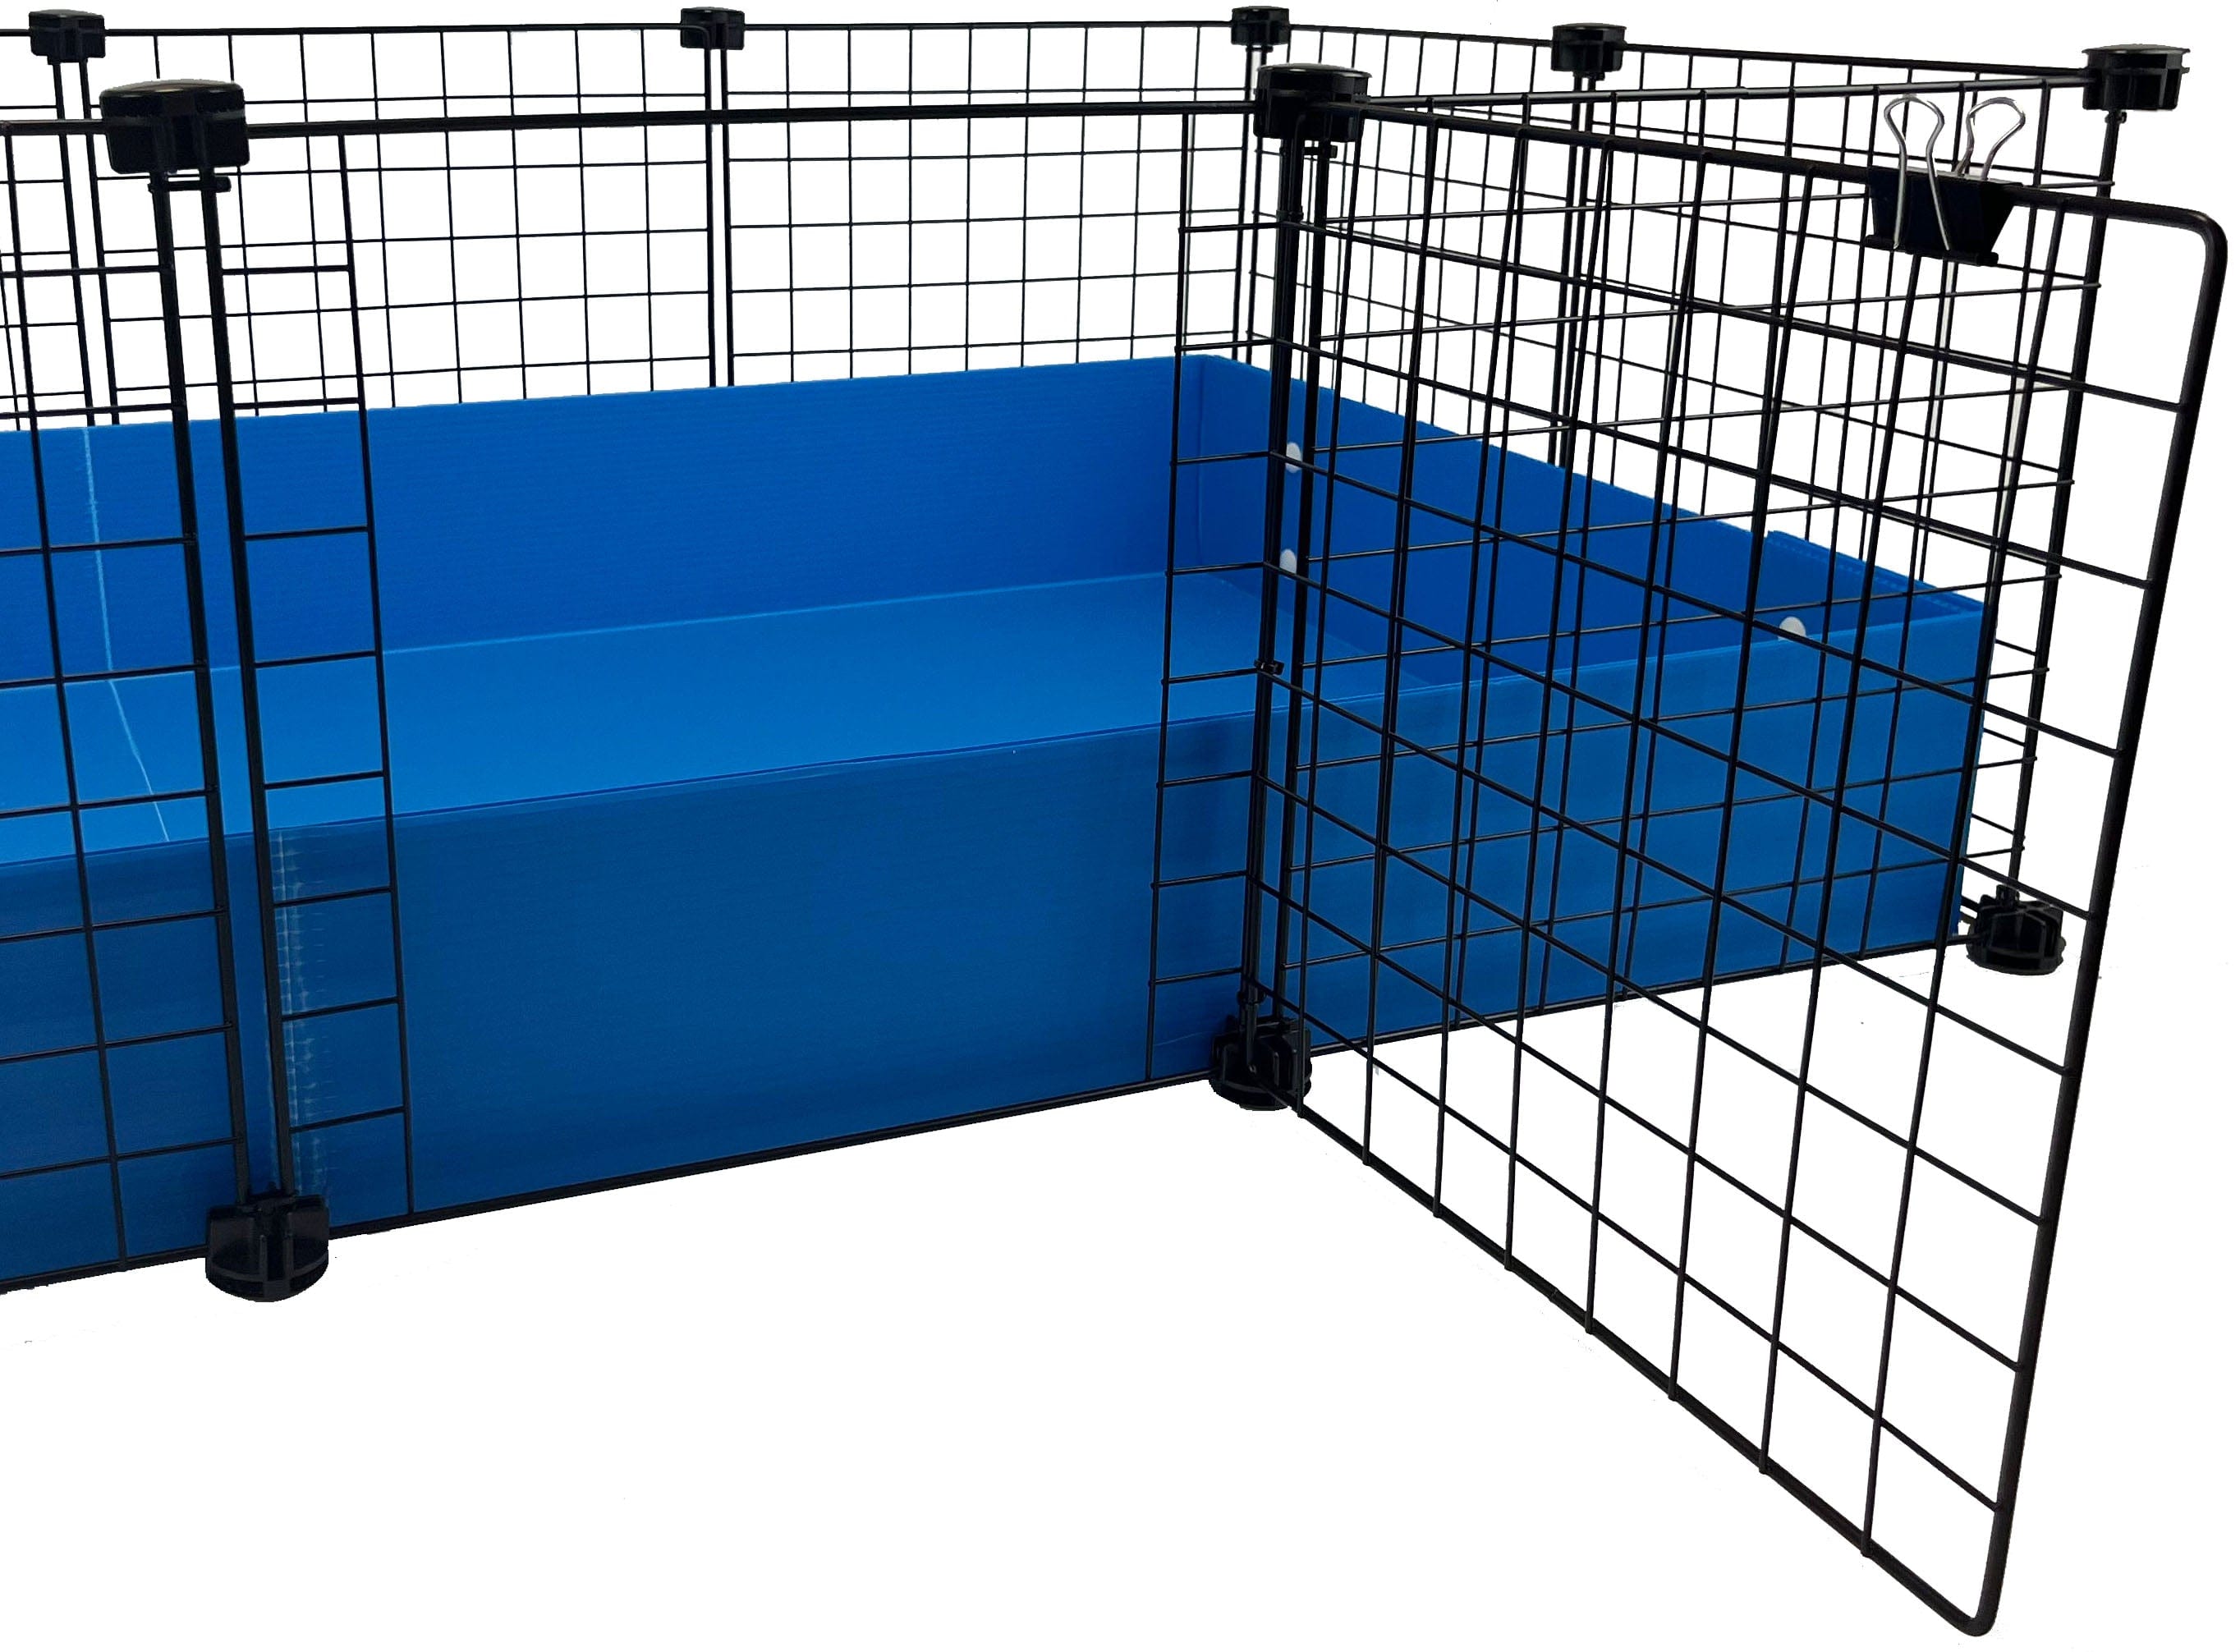 Black door grid attached to a blue C&C guinea pig cage